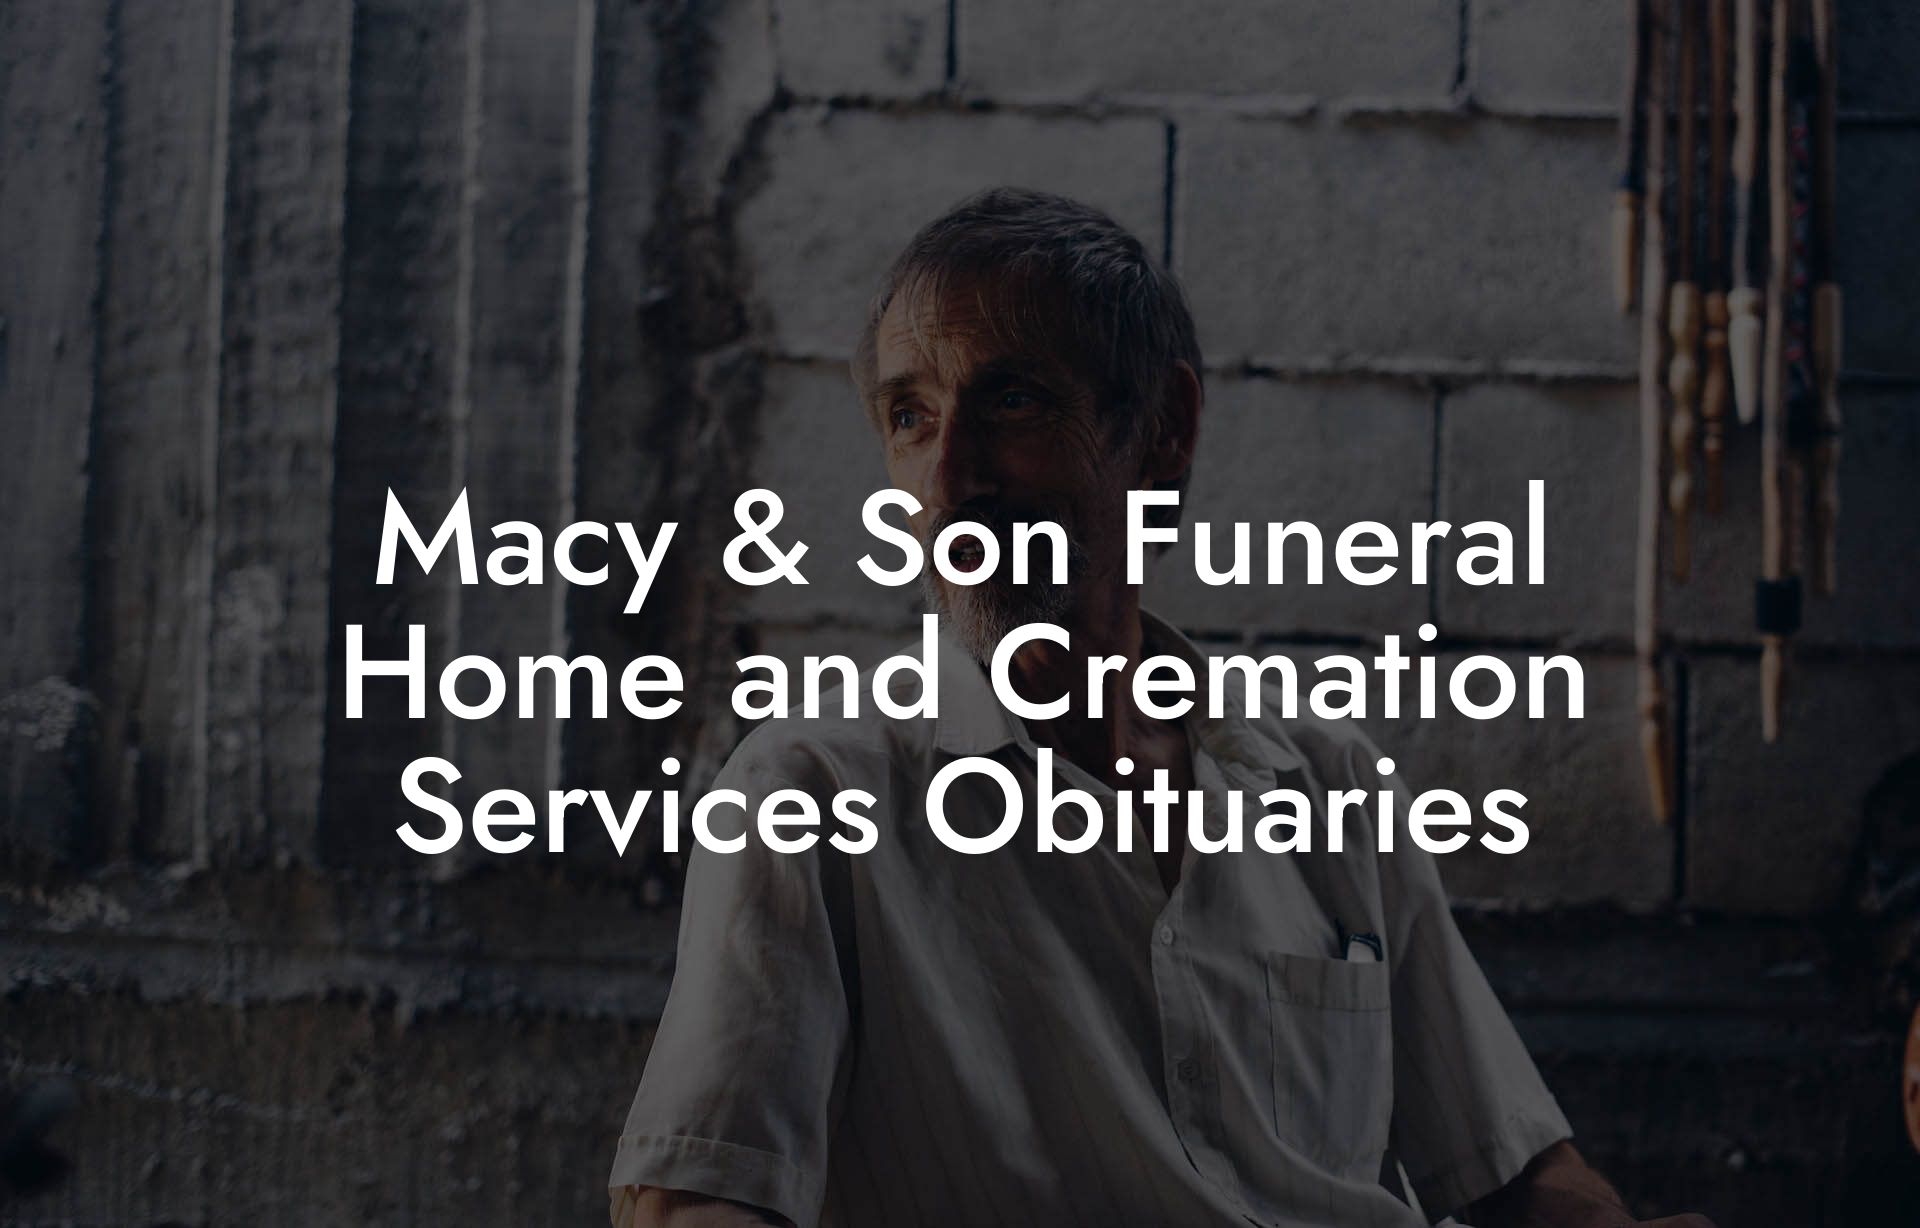 Macy & Son Funeral Home and Cremation Services Obituaries